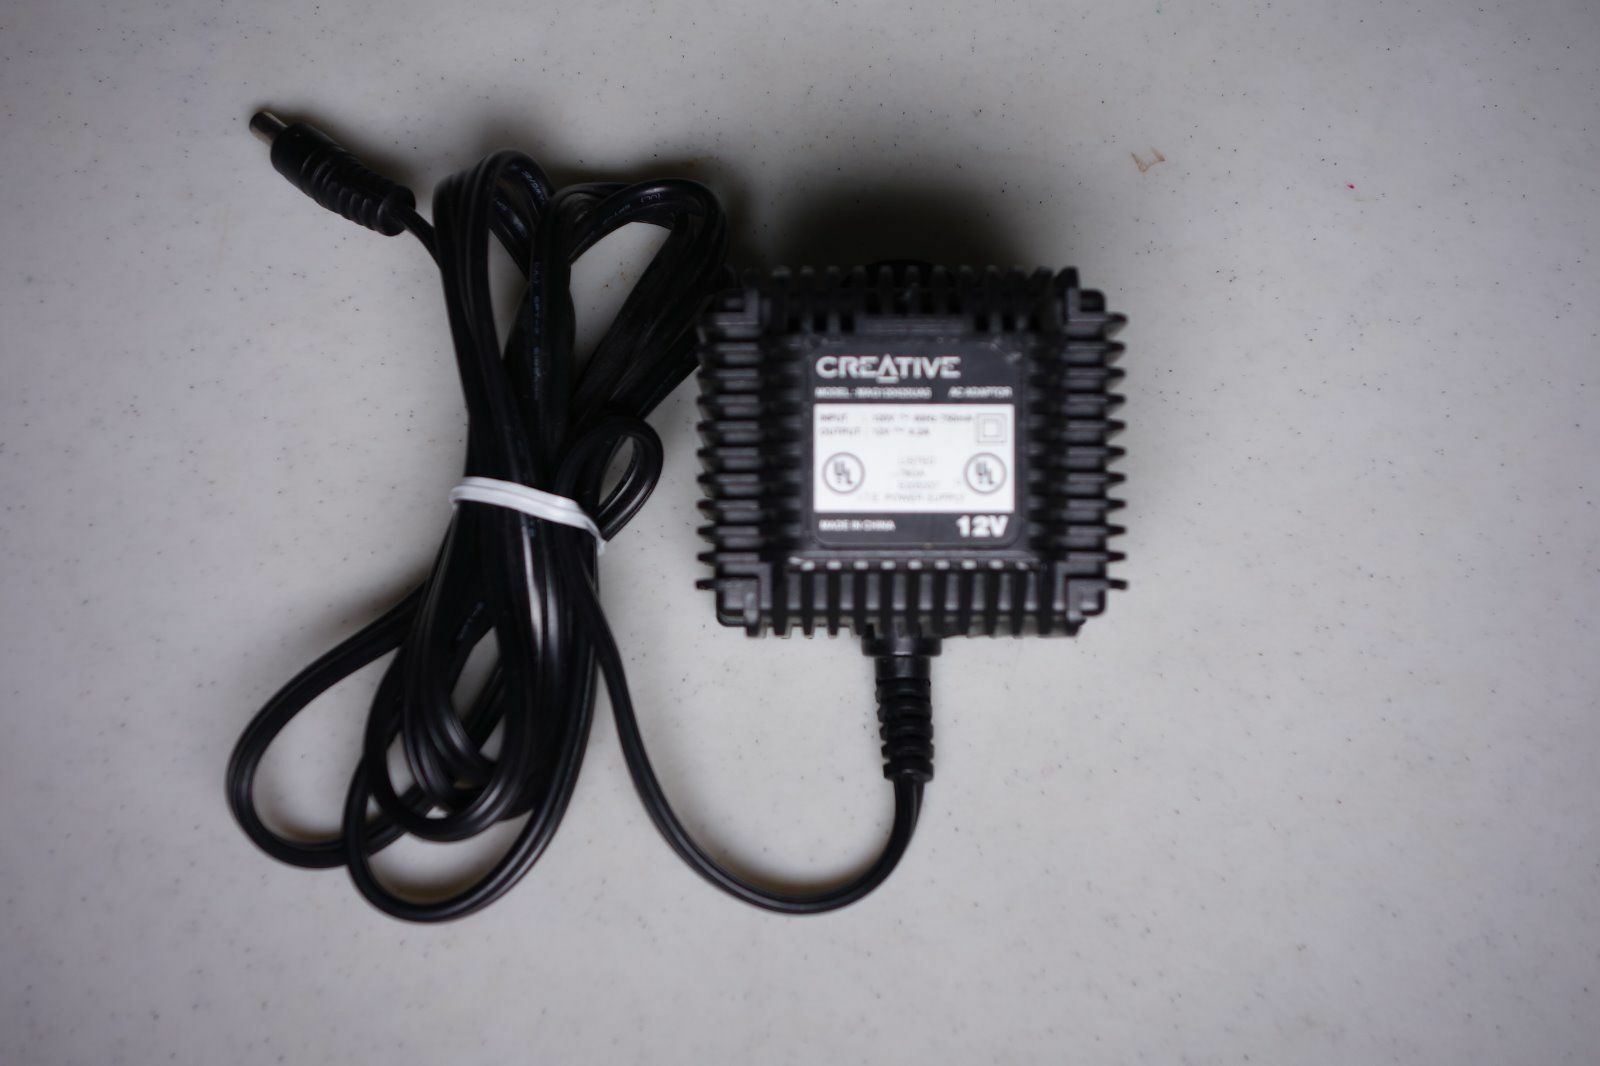 12v ac Creative adapter cord =Inspire speakers T3030 pc computer MP3 plug MF0315 - $44.50